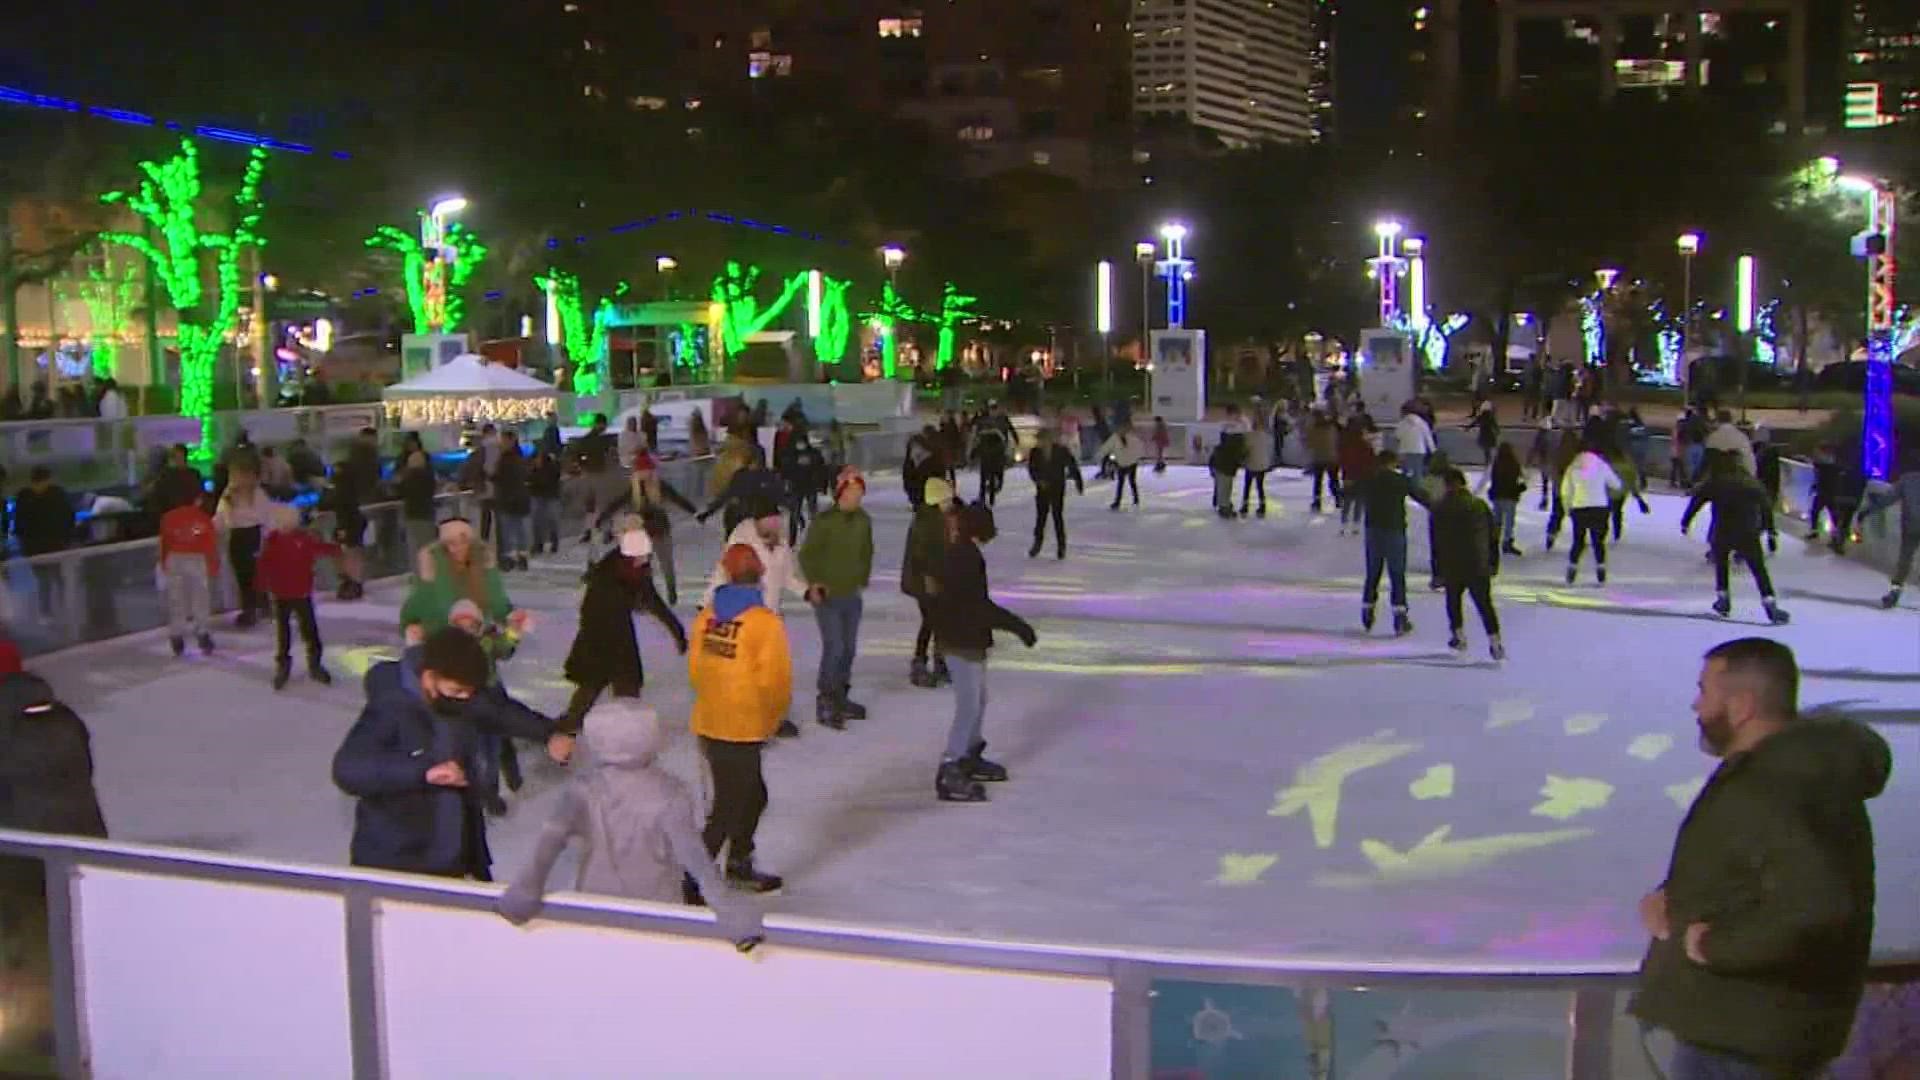 The temperatures dropped quickly in Houston overnight and many people decided to take advantage of the cold weather.